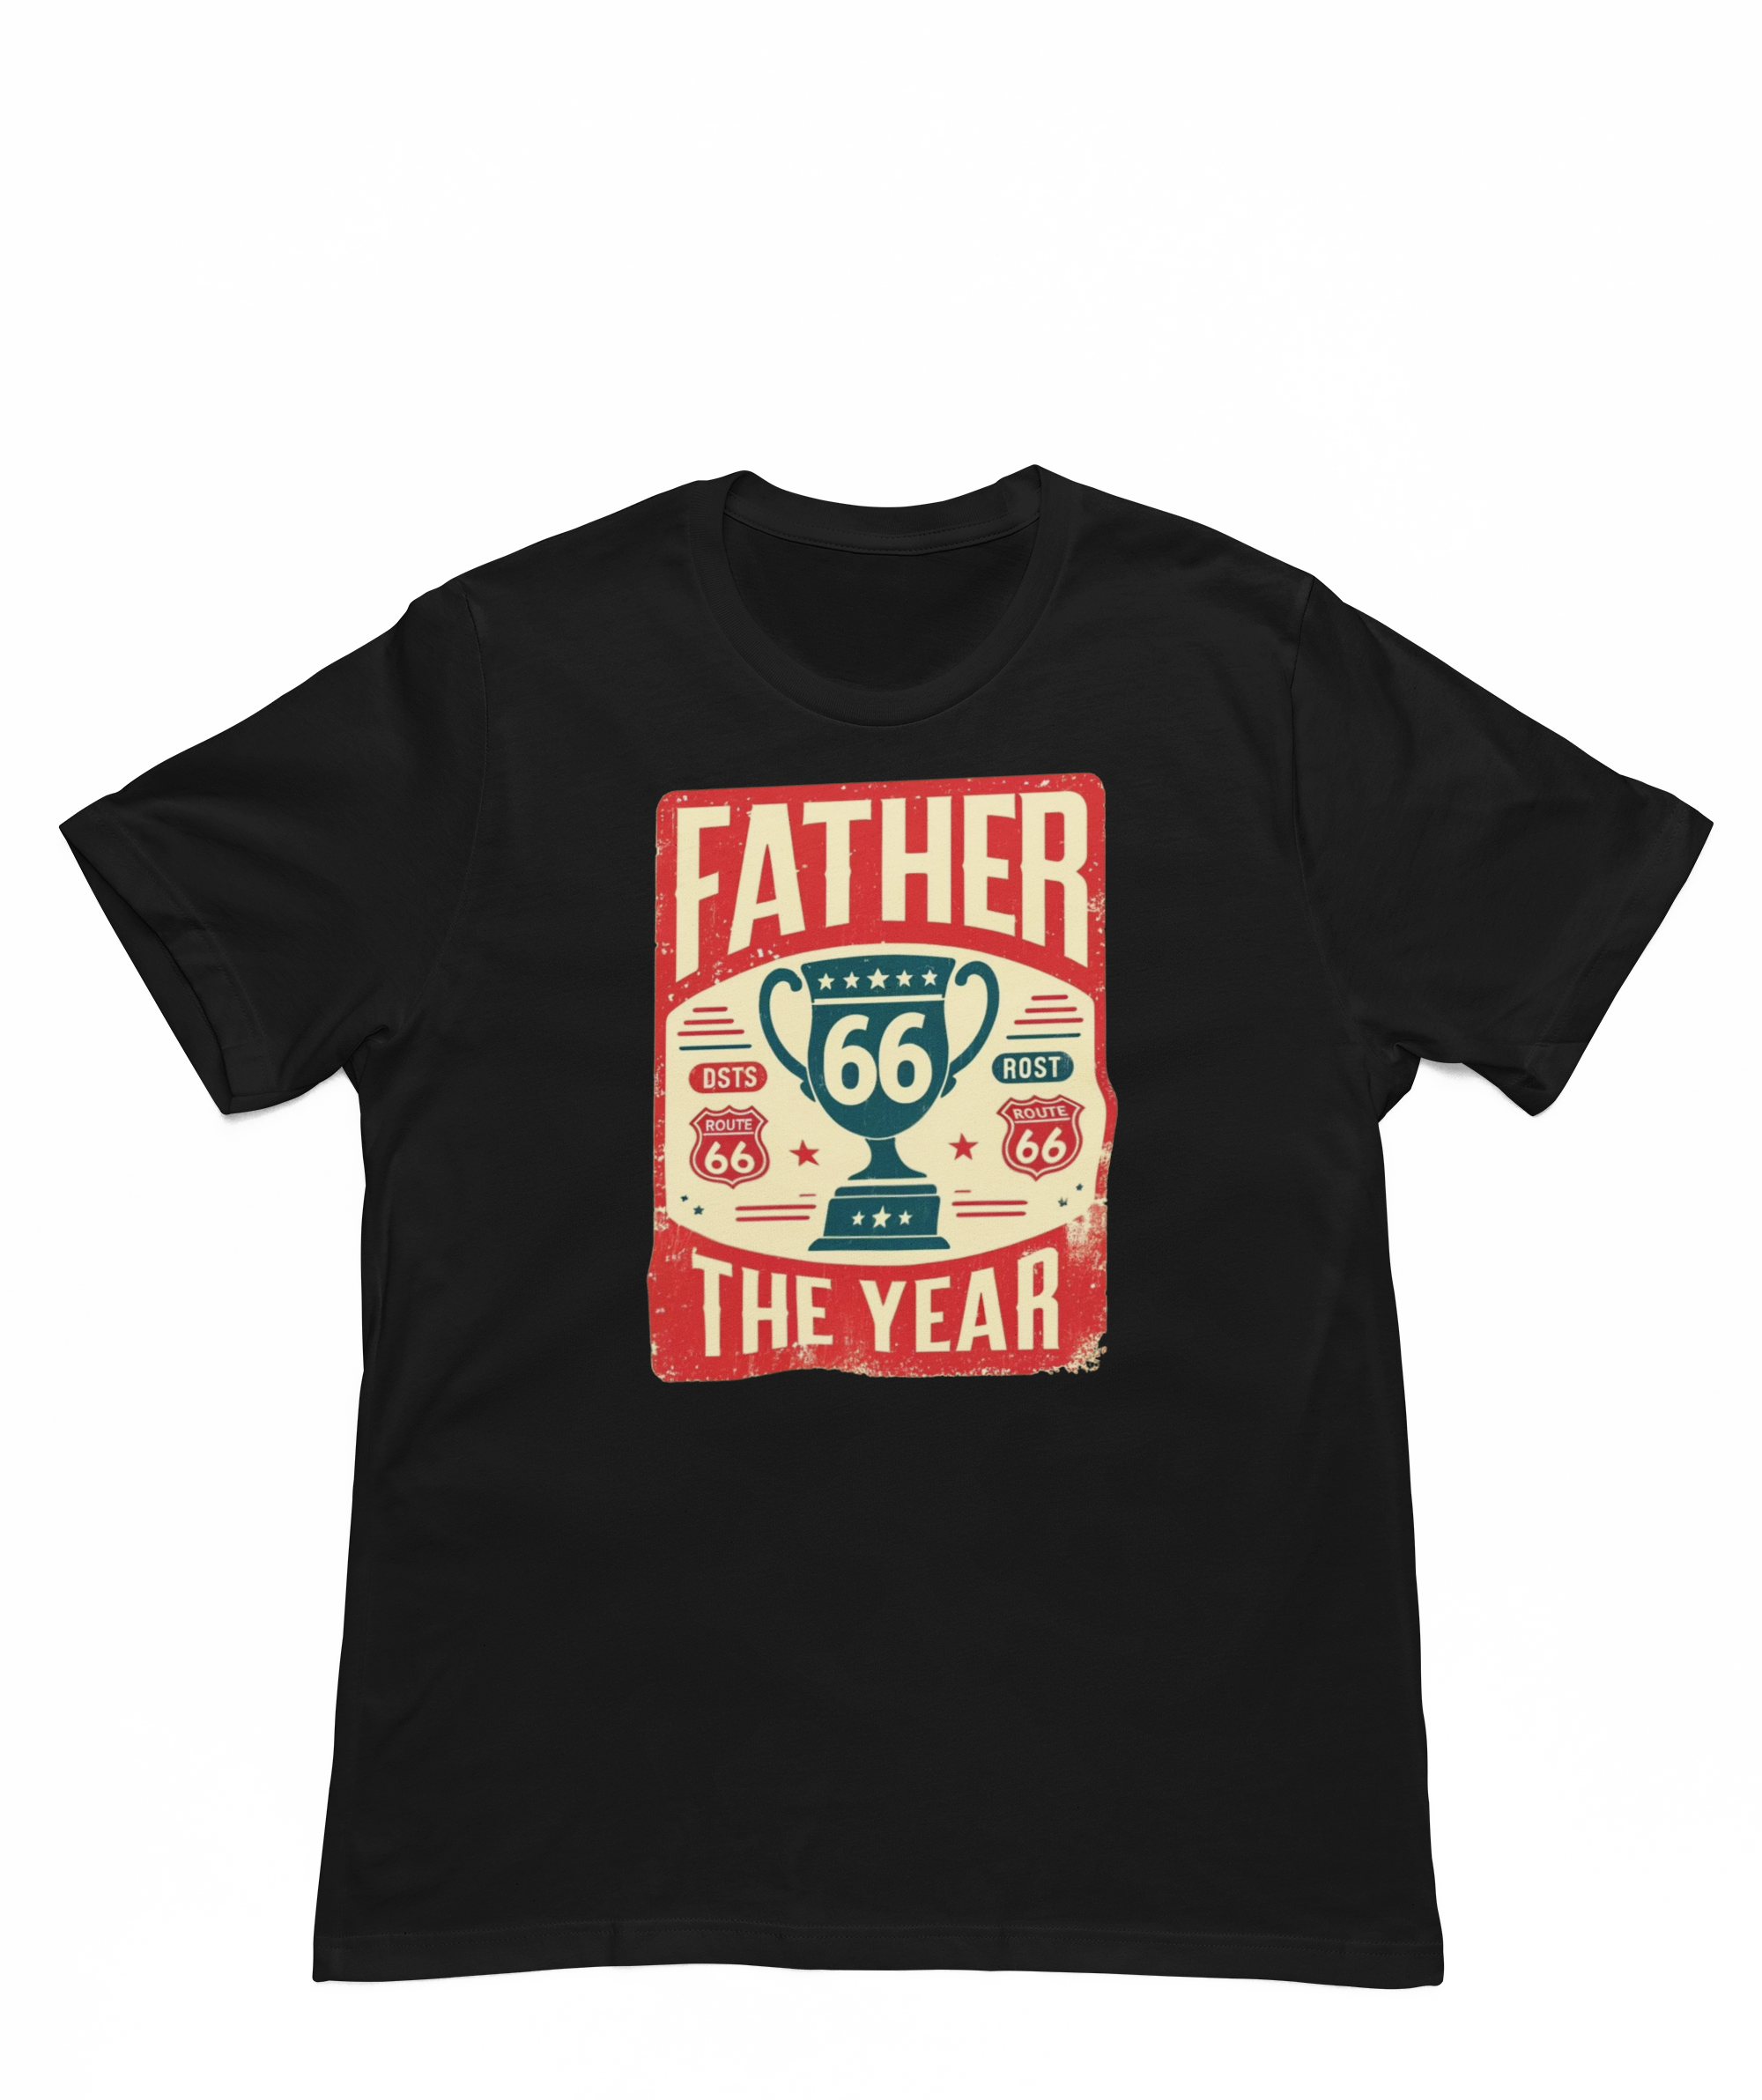 Father of the year t-shirt - Father's Day gift